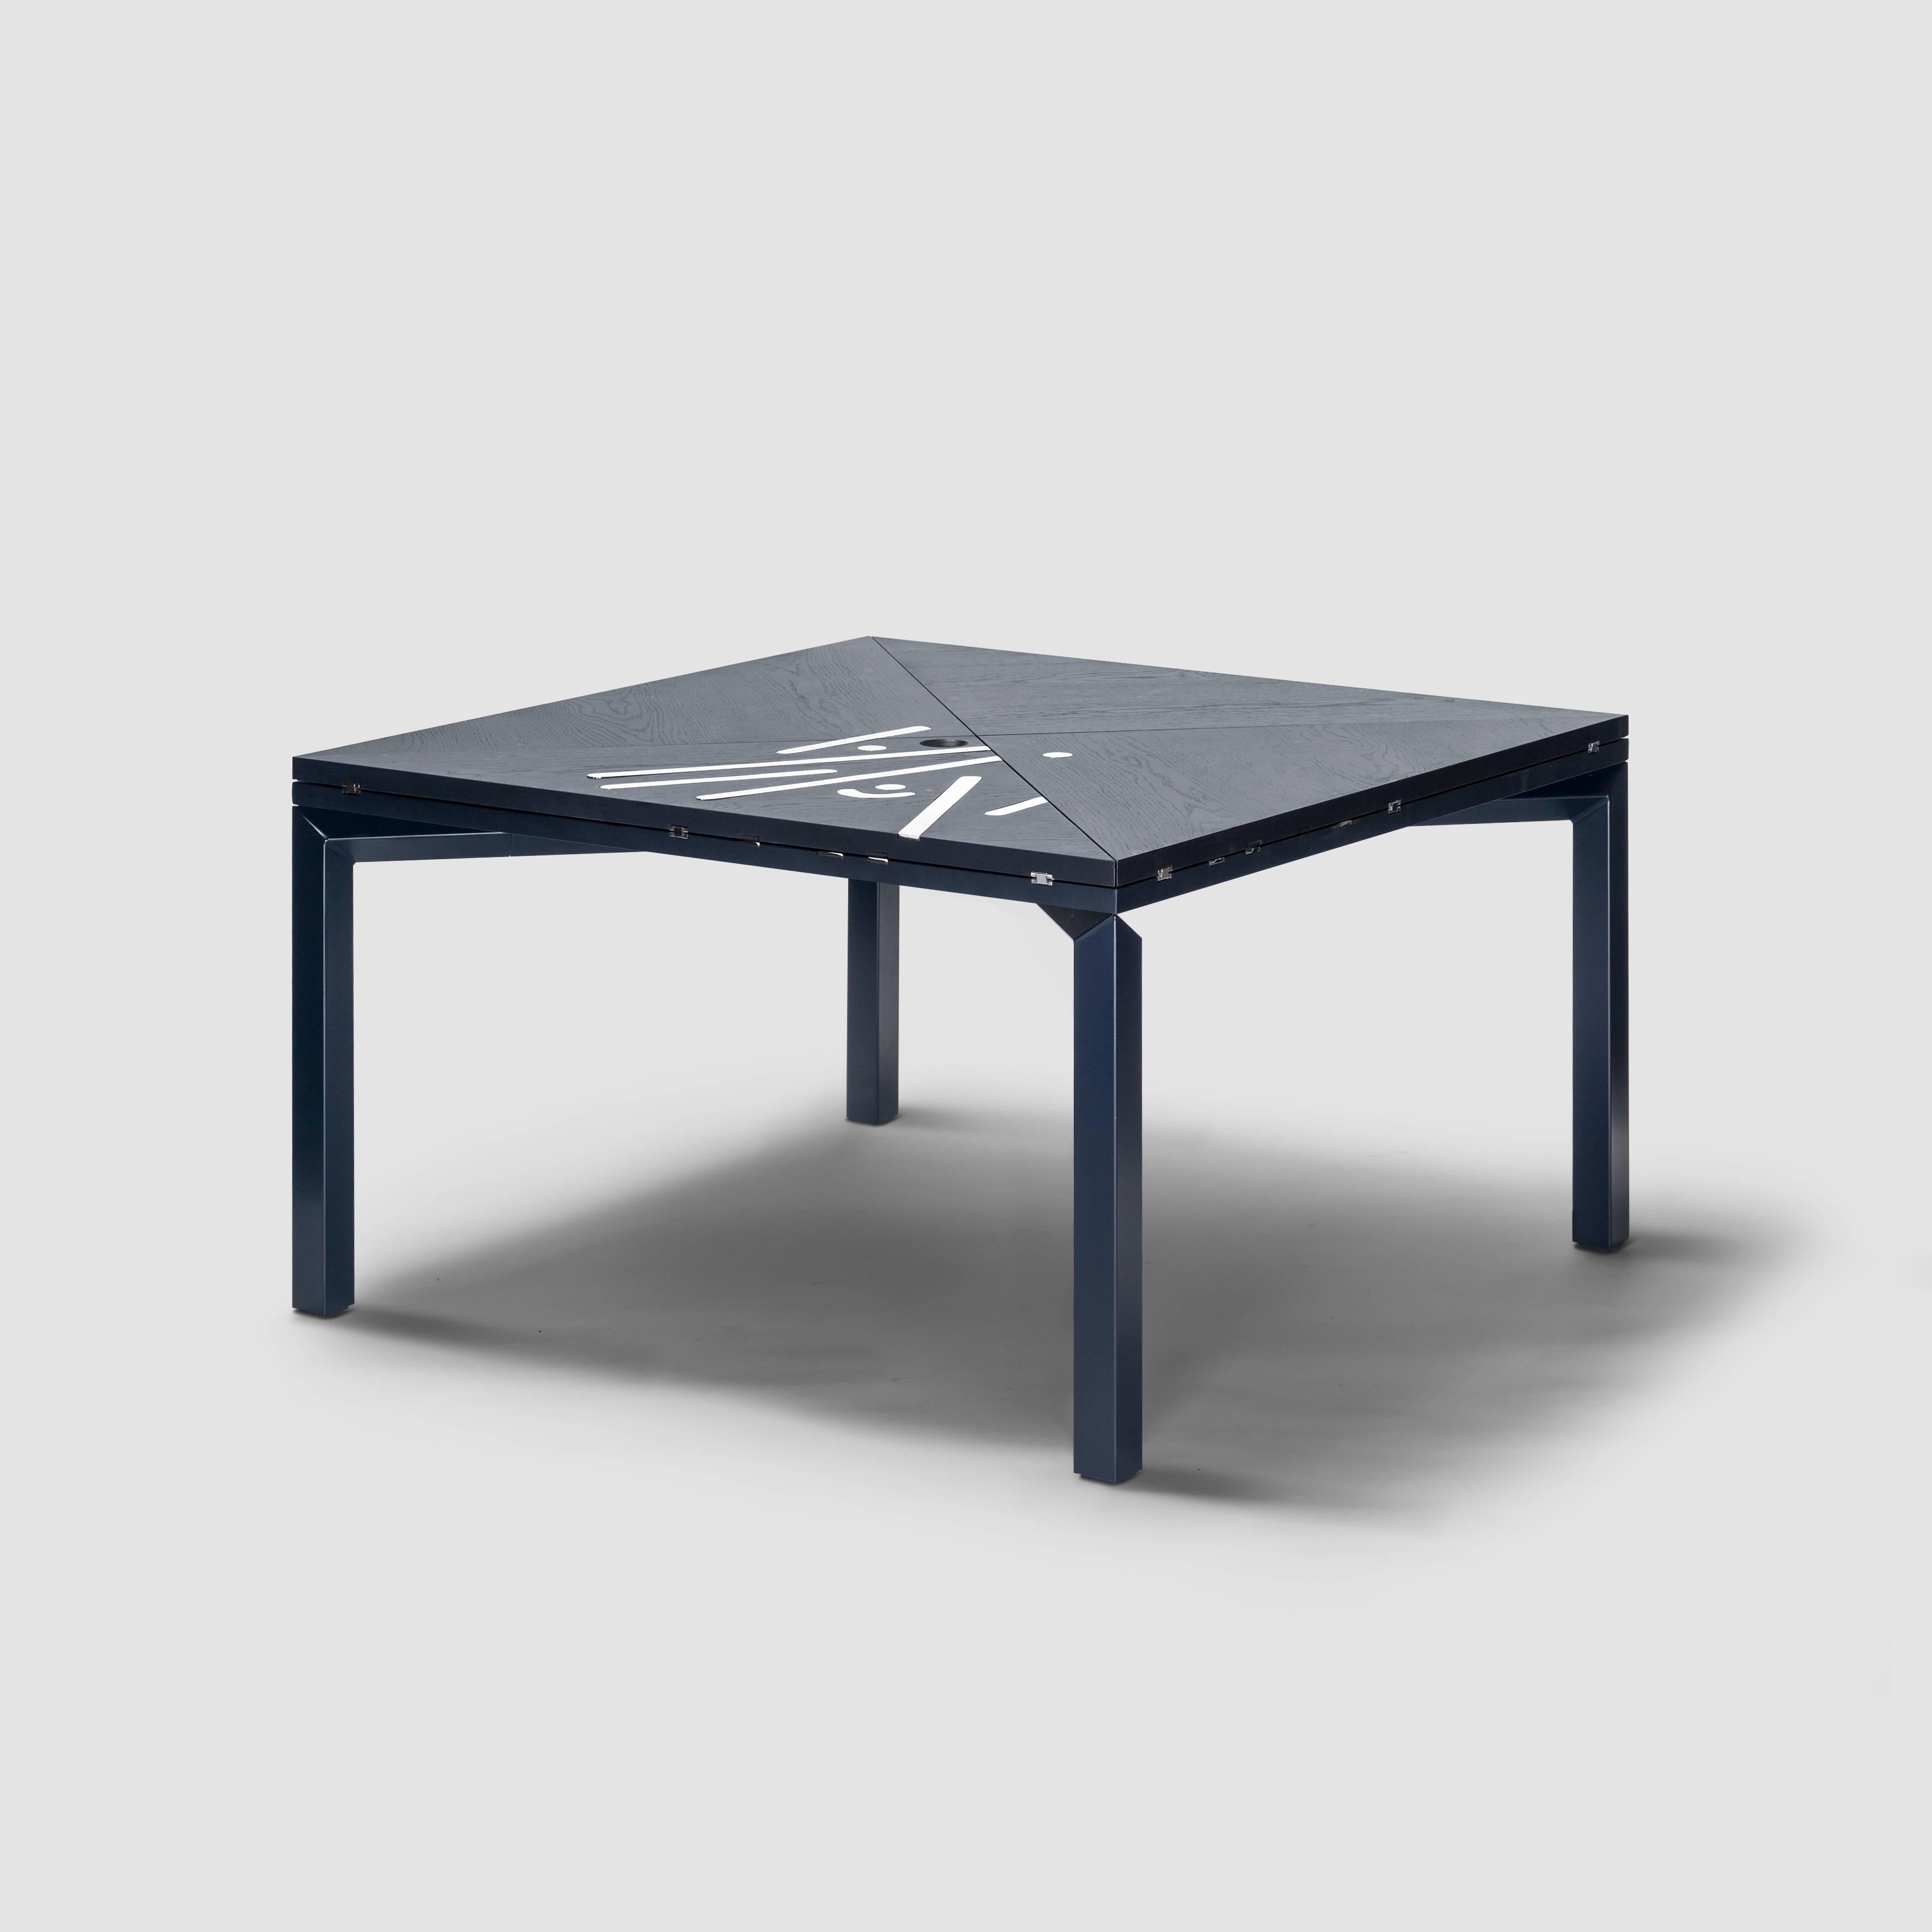 Contemporary Limited Edition Alella Table by Lluis Clotet